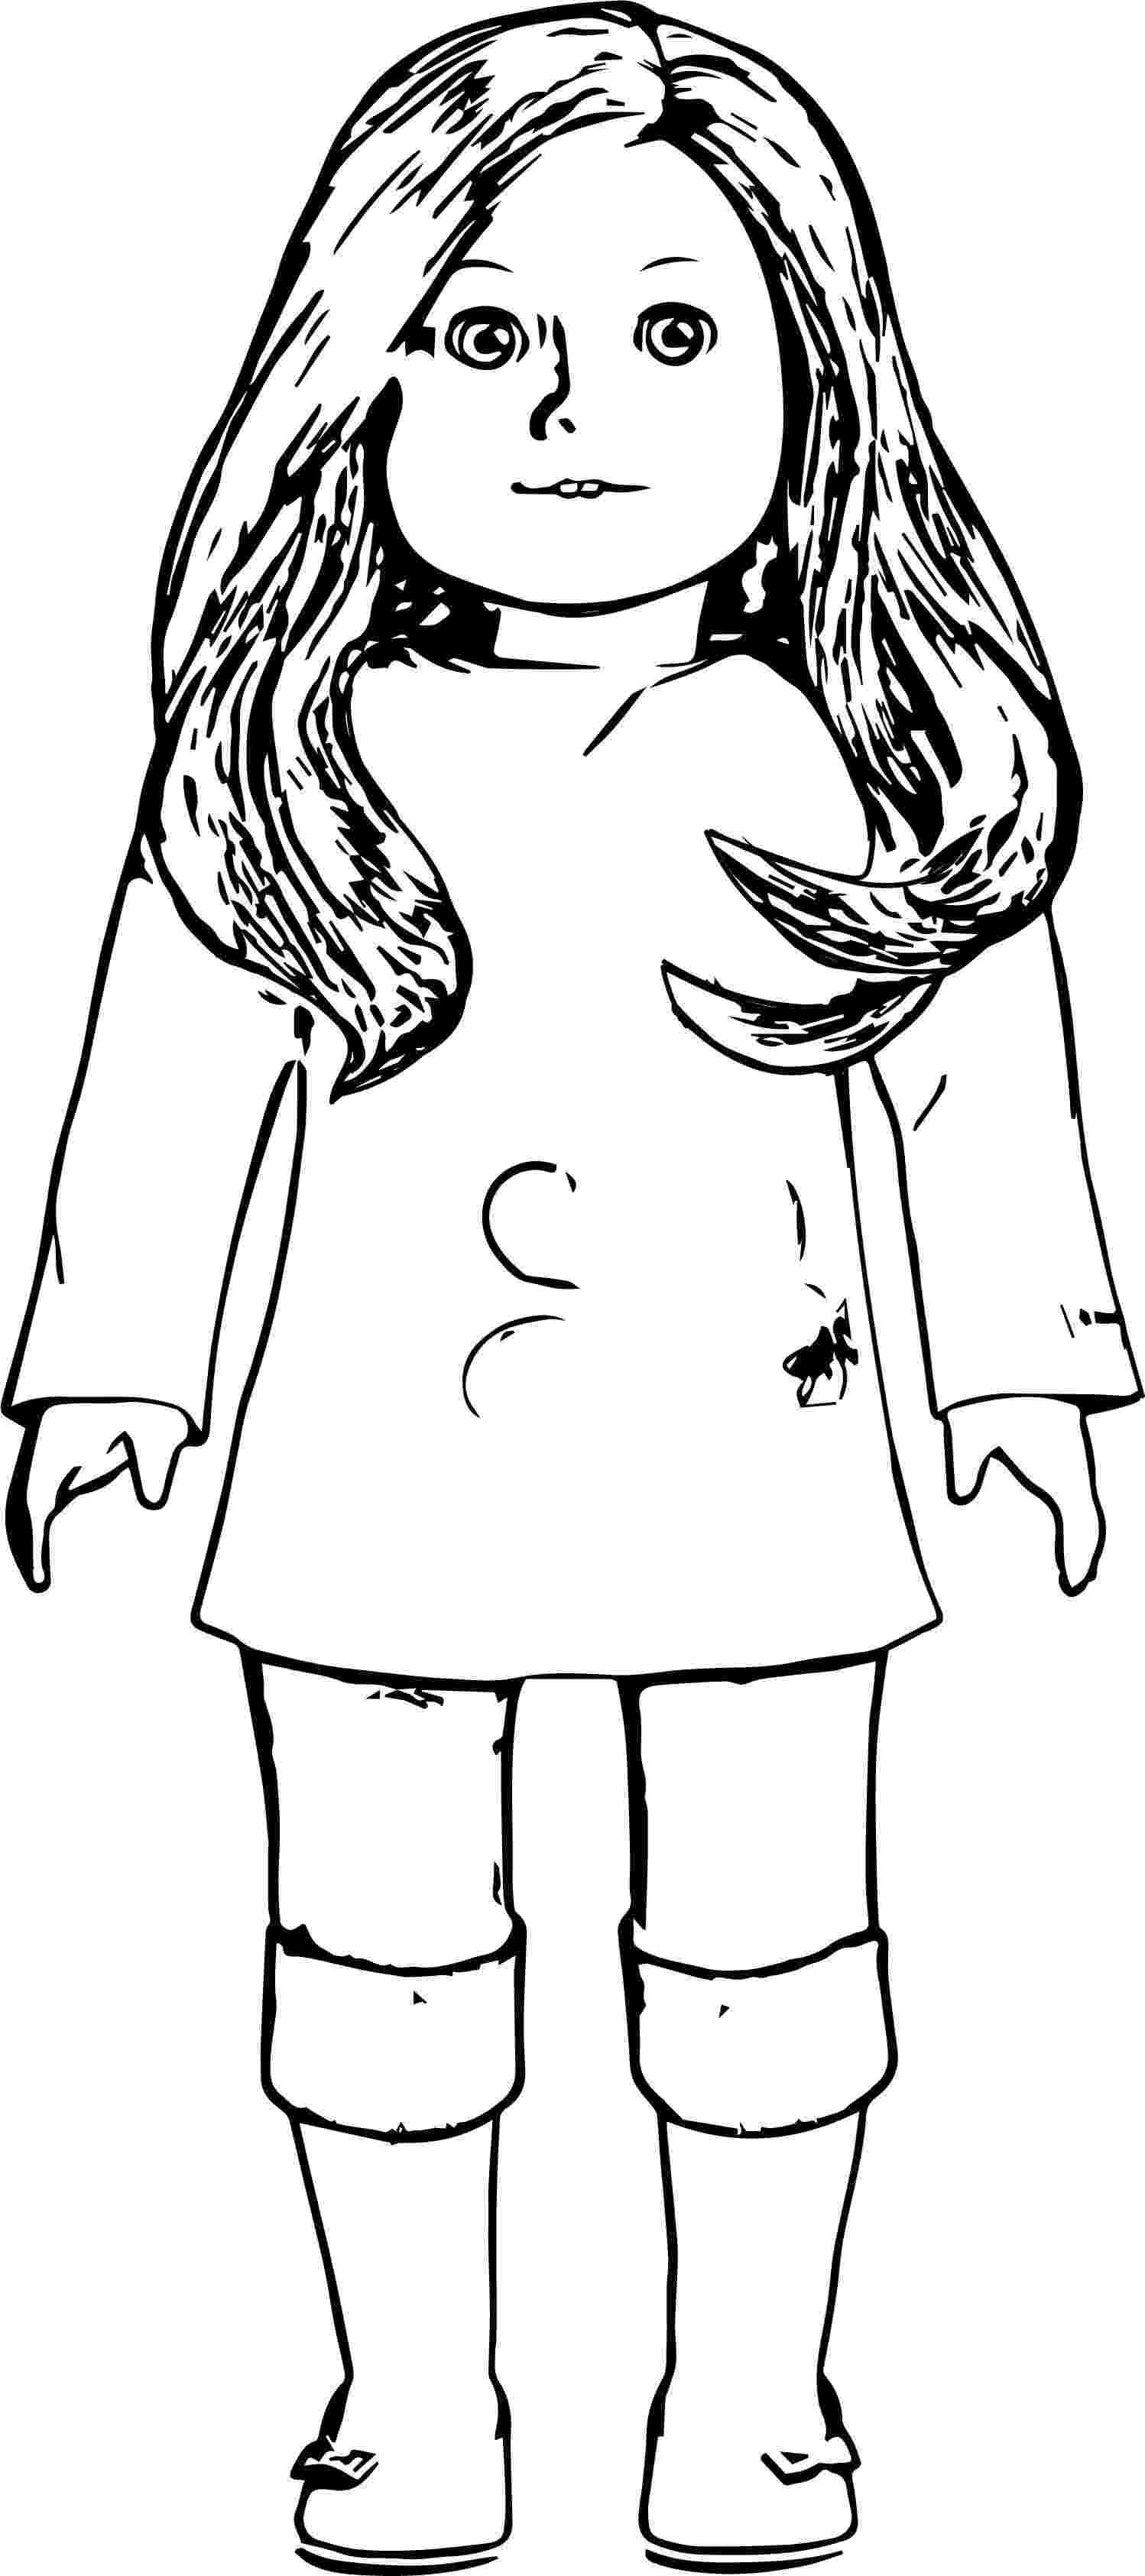 american girl doll coloring pages american girl isabelle doll coloring page 15382 coloring doll girl american pages 